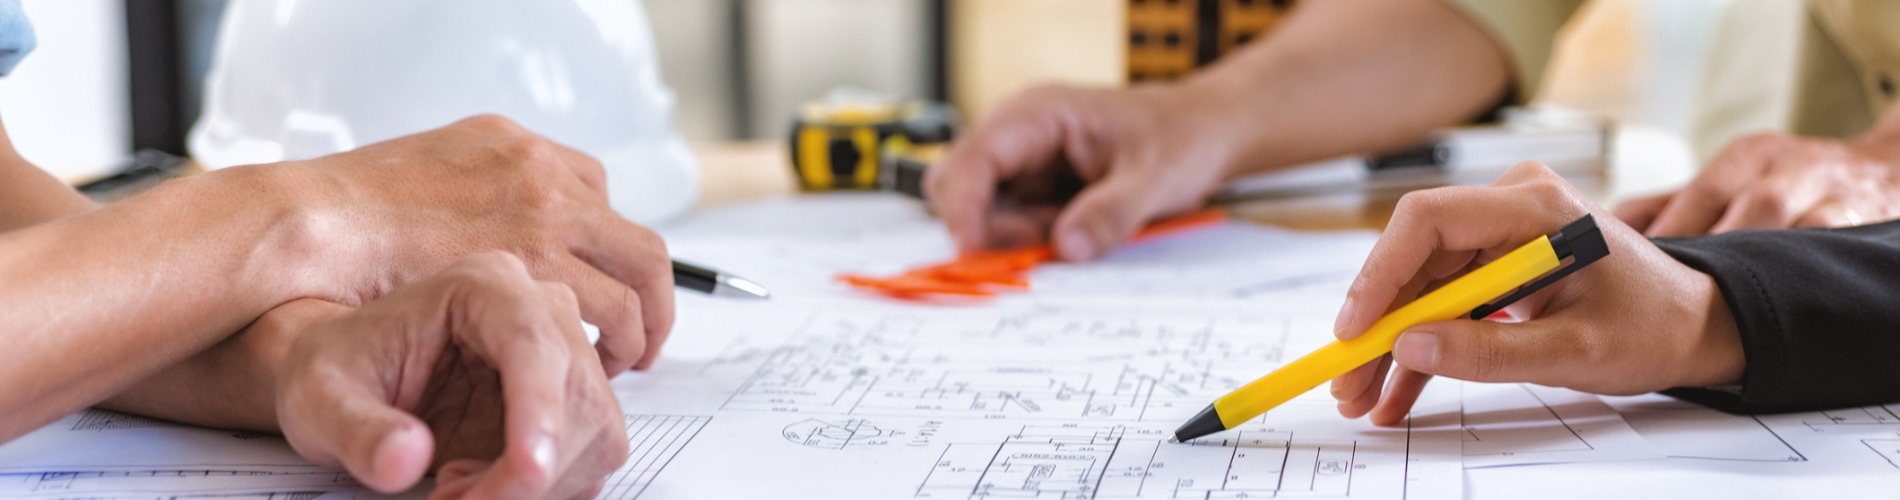 image-of-team-engineer-checks-construction-blueprints-on-new-project-1900x500